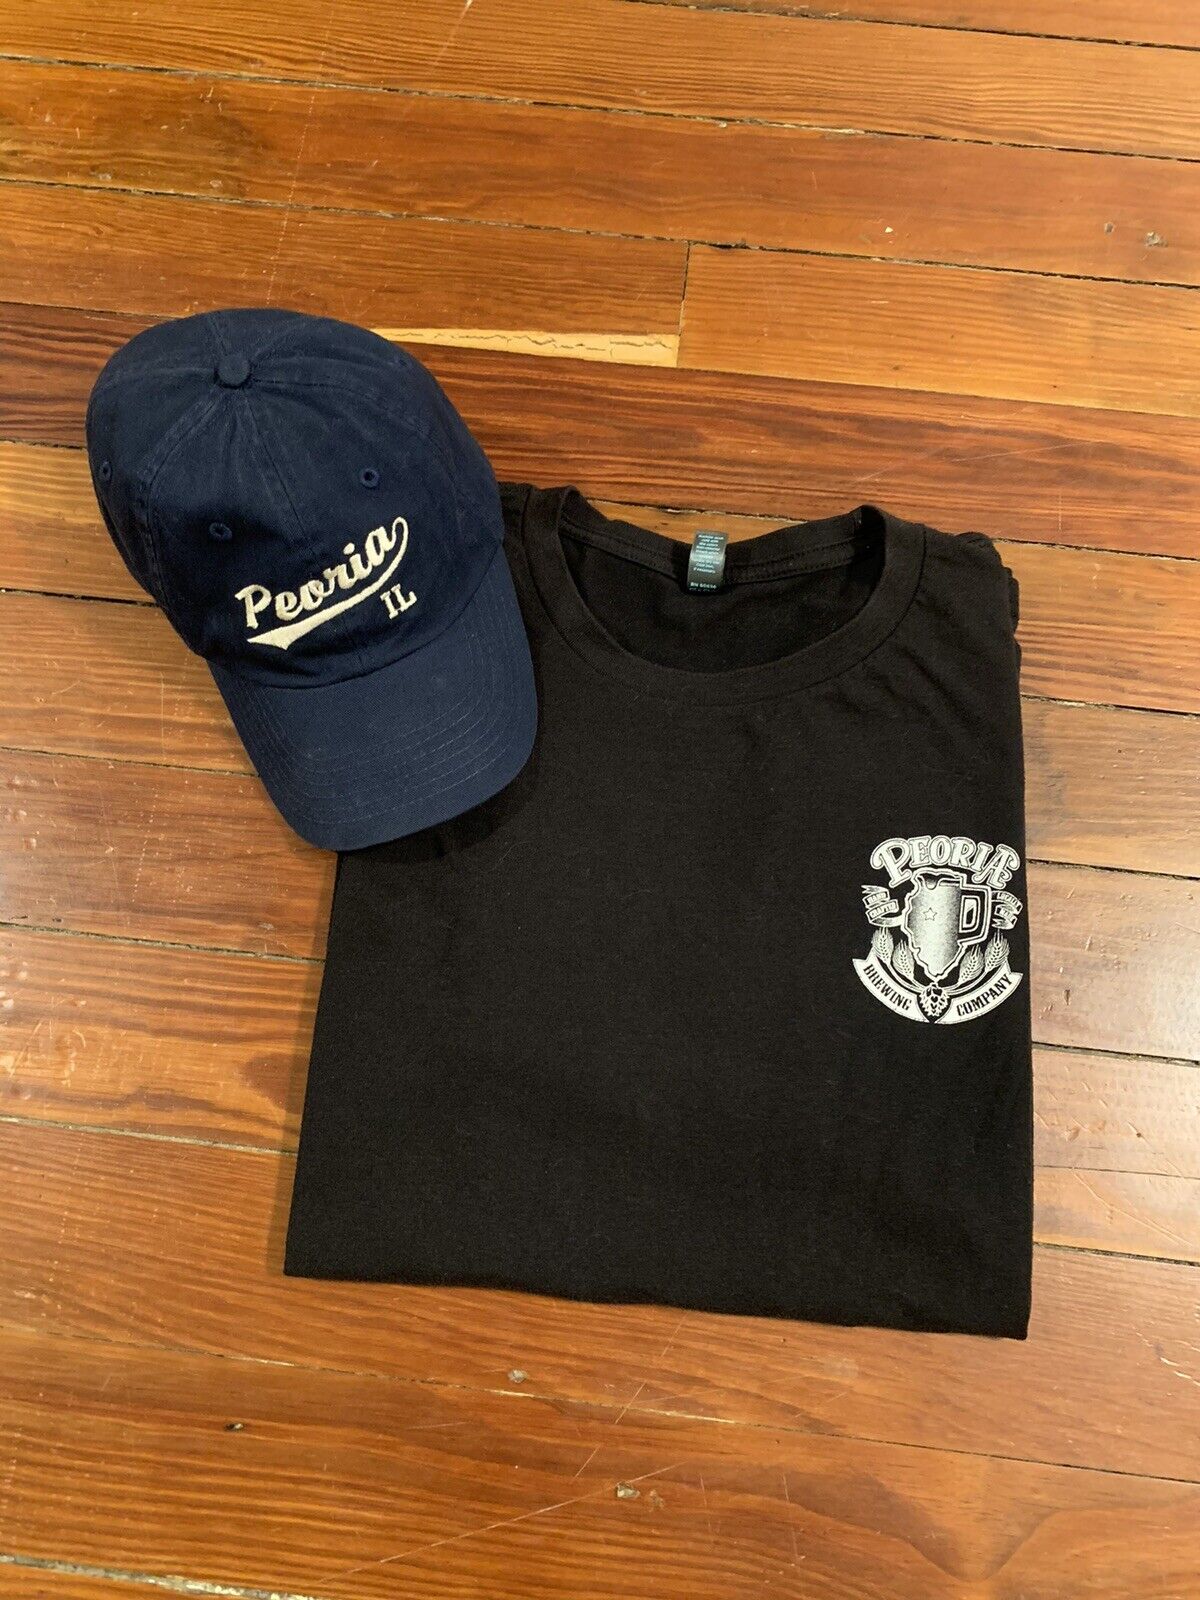 Peoria (IL) Brewing Company Tee Shirt Size Large and Peoria (IL) Hat Combo Pack